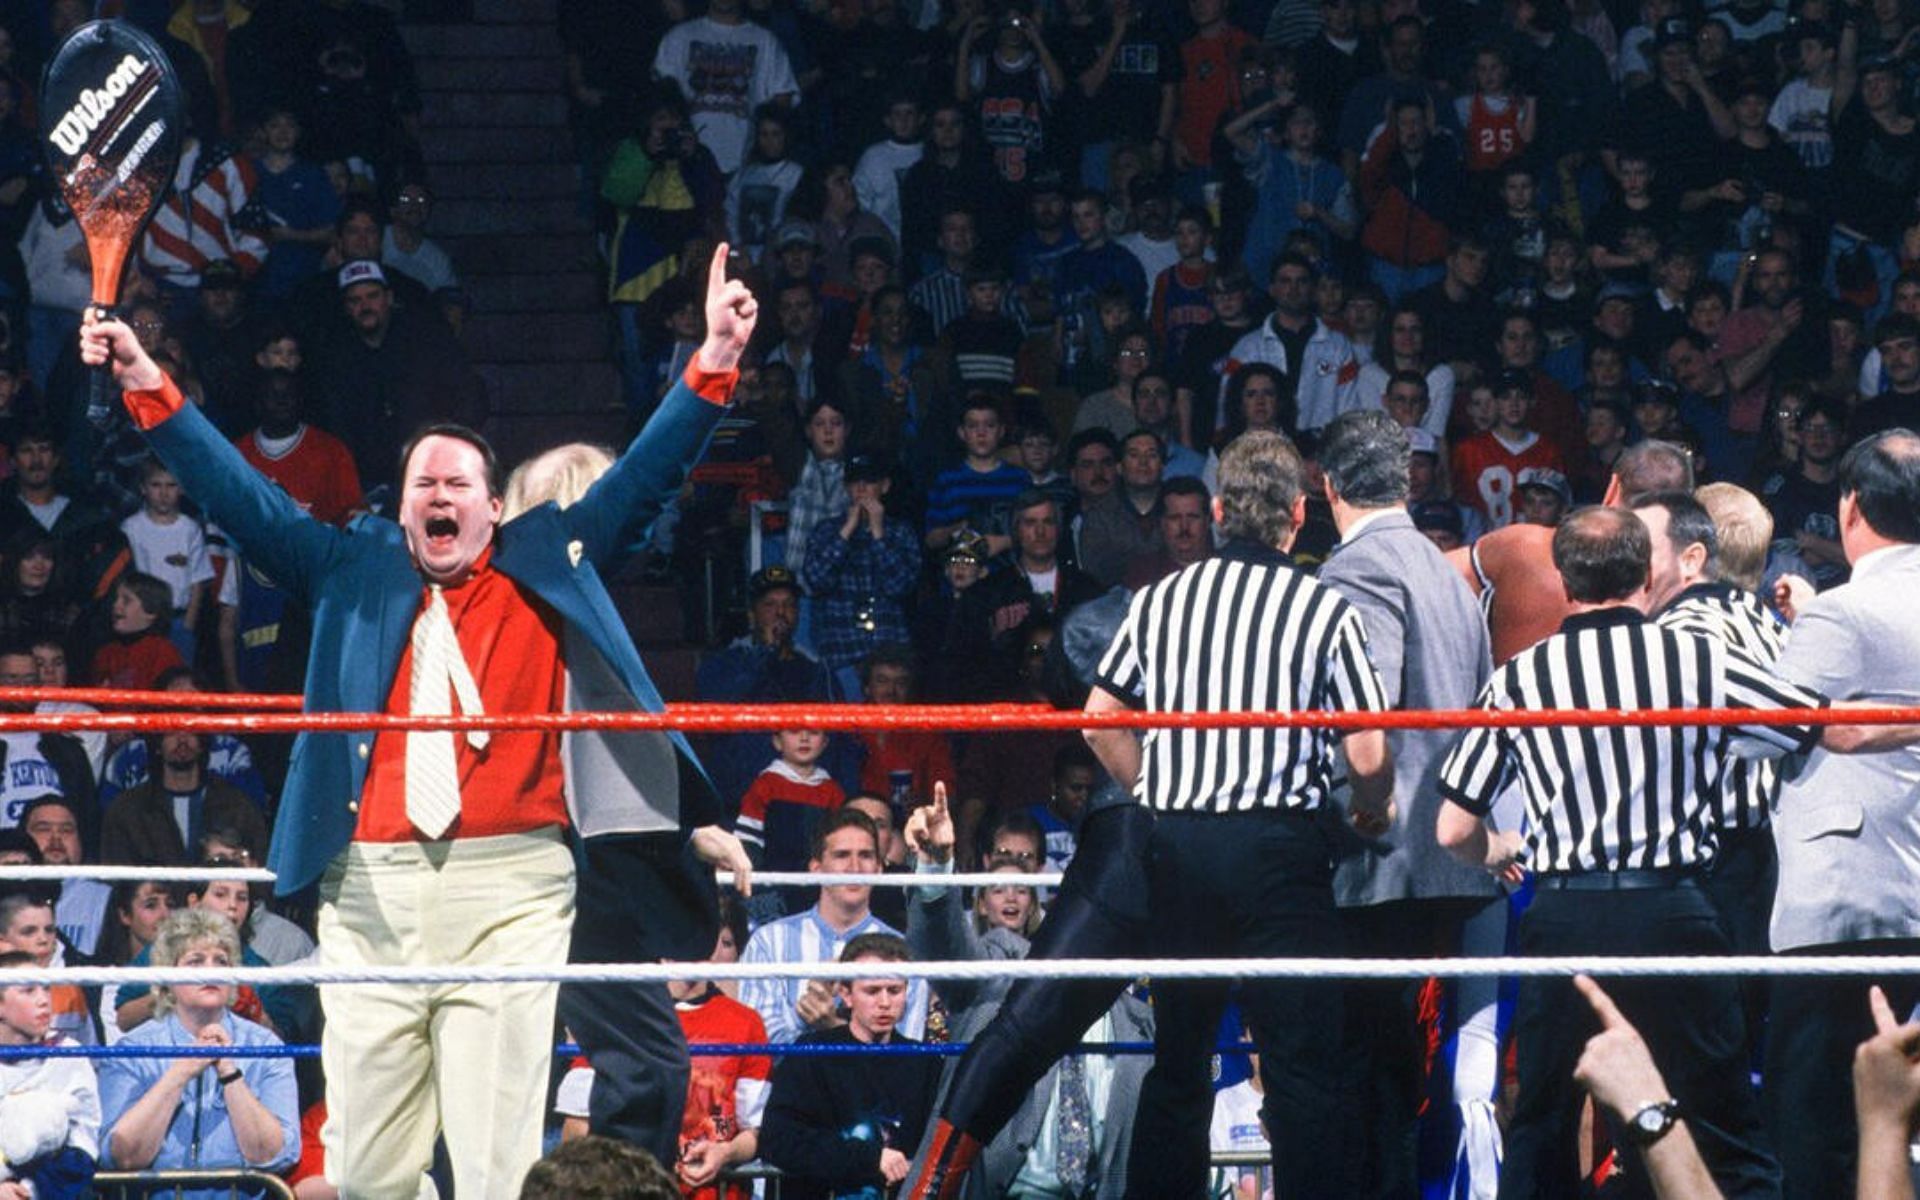 Jim Cornette has managed some of the most legendary tag teams in history!